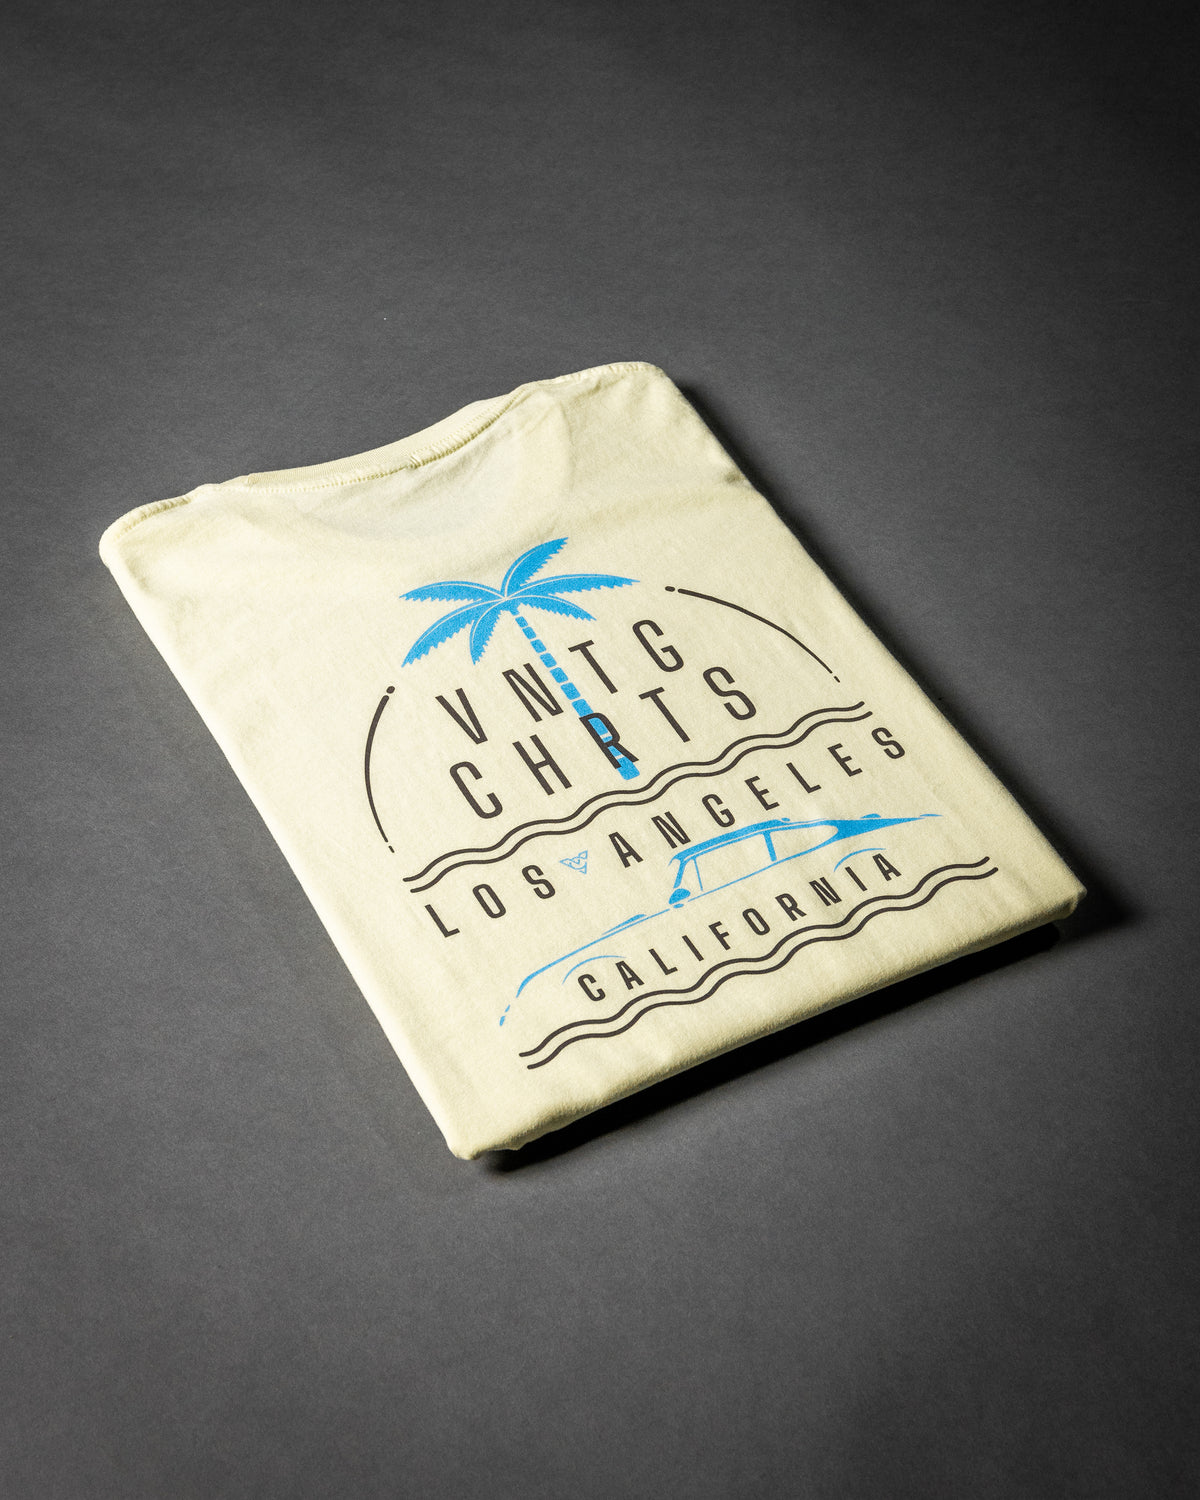 VC PALMS TEE (Chartreuse)